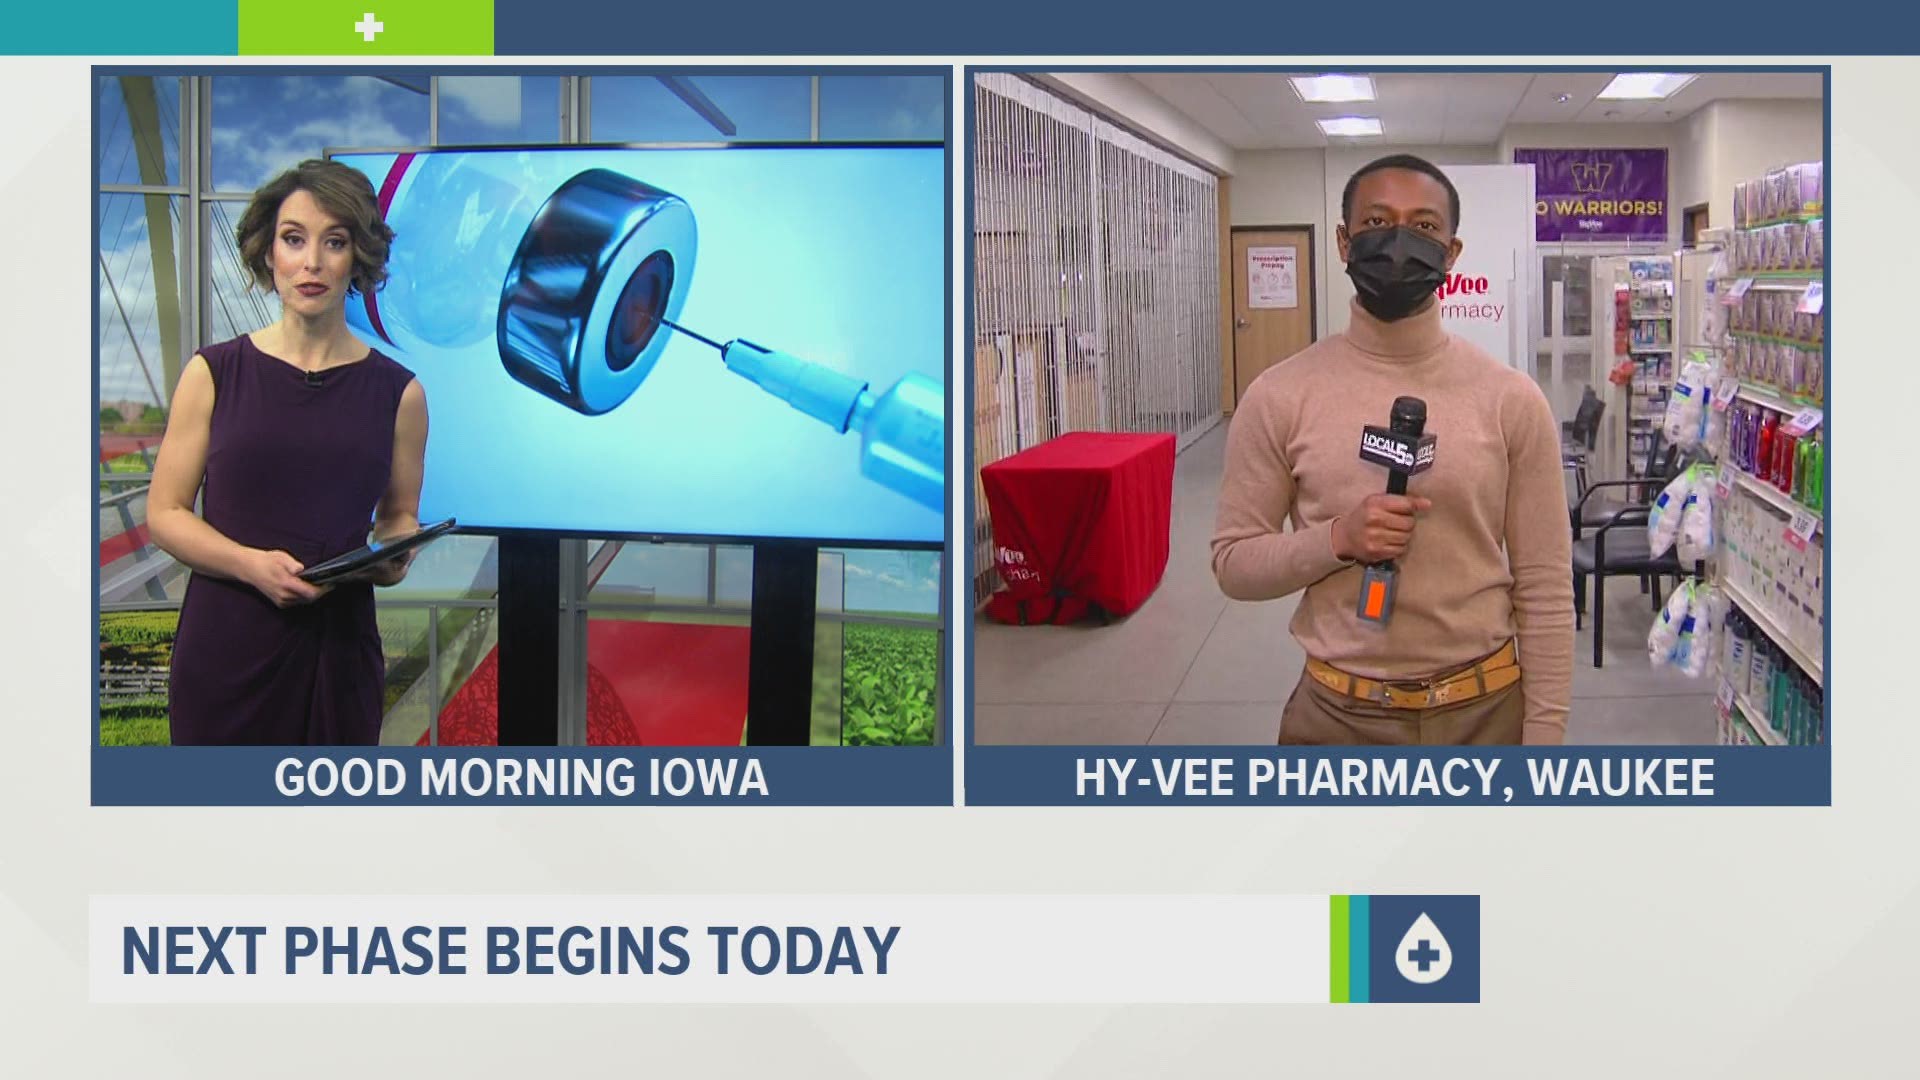 Before showing up at a Hy-Vee pharmacy, make sure to go online and schedule an appointment.